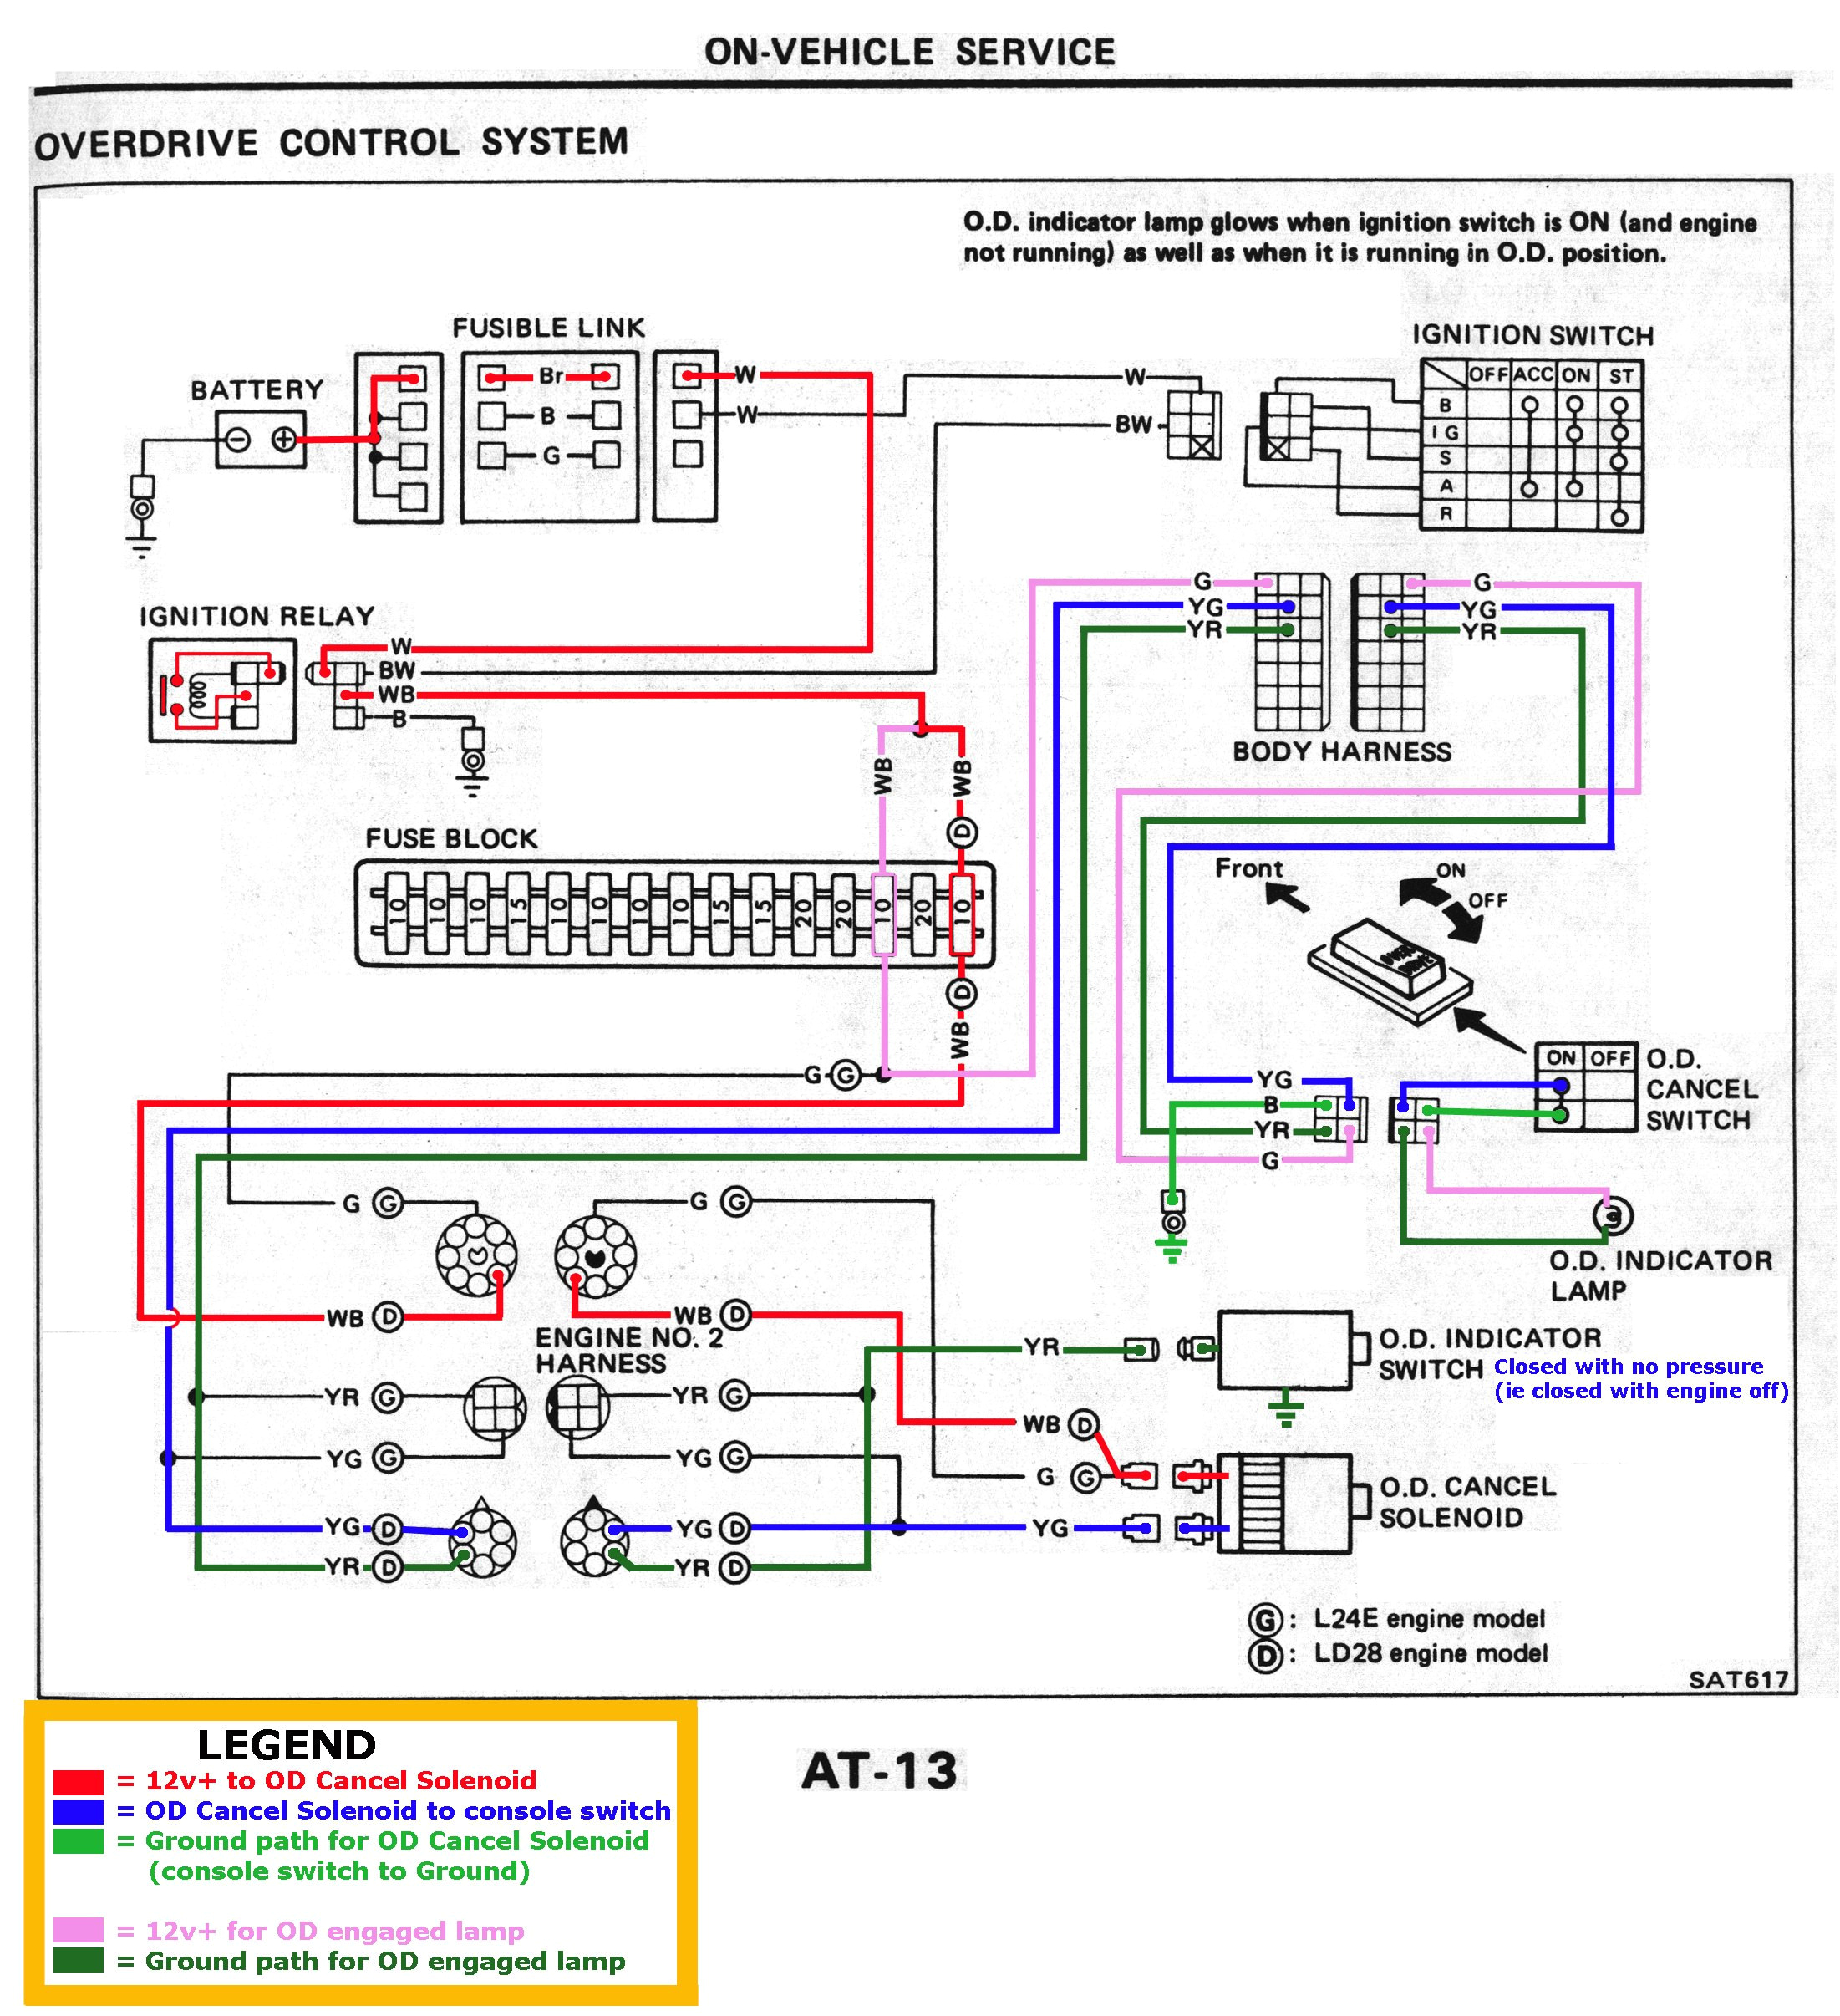 codes for electrical diagrams relay wiring wiring diagrams data general electric motor wiring color code free download wiring